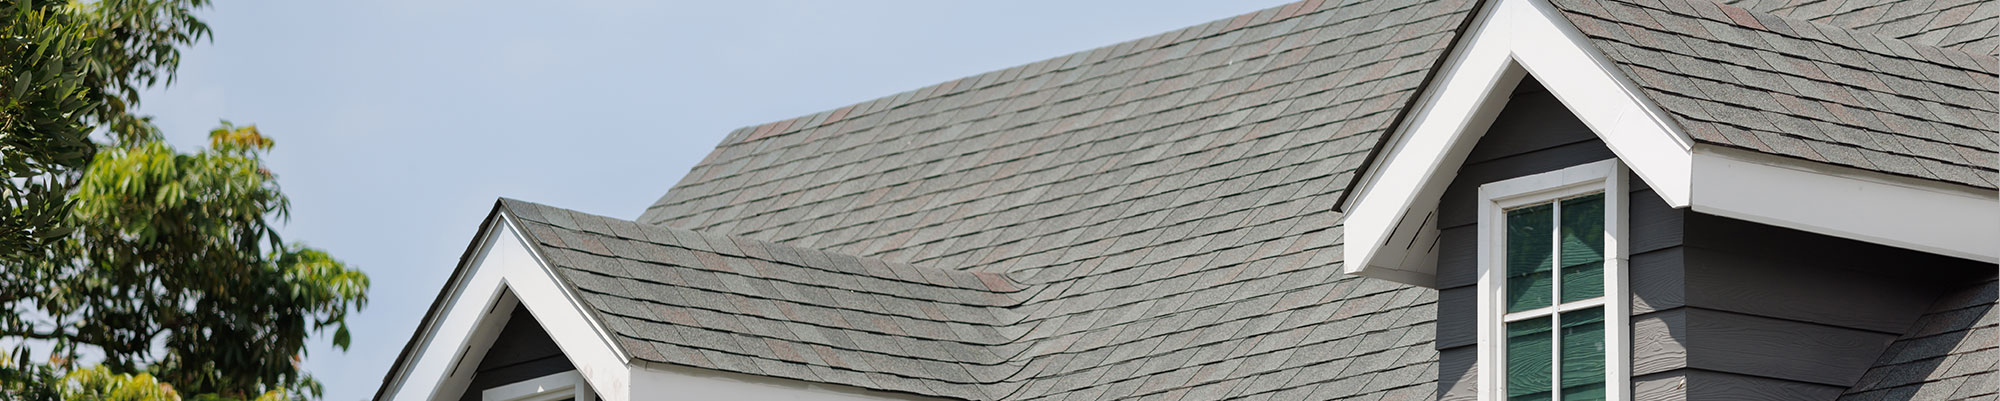 Wind Lake roof replacement company